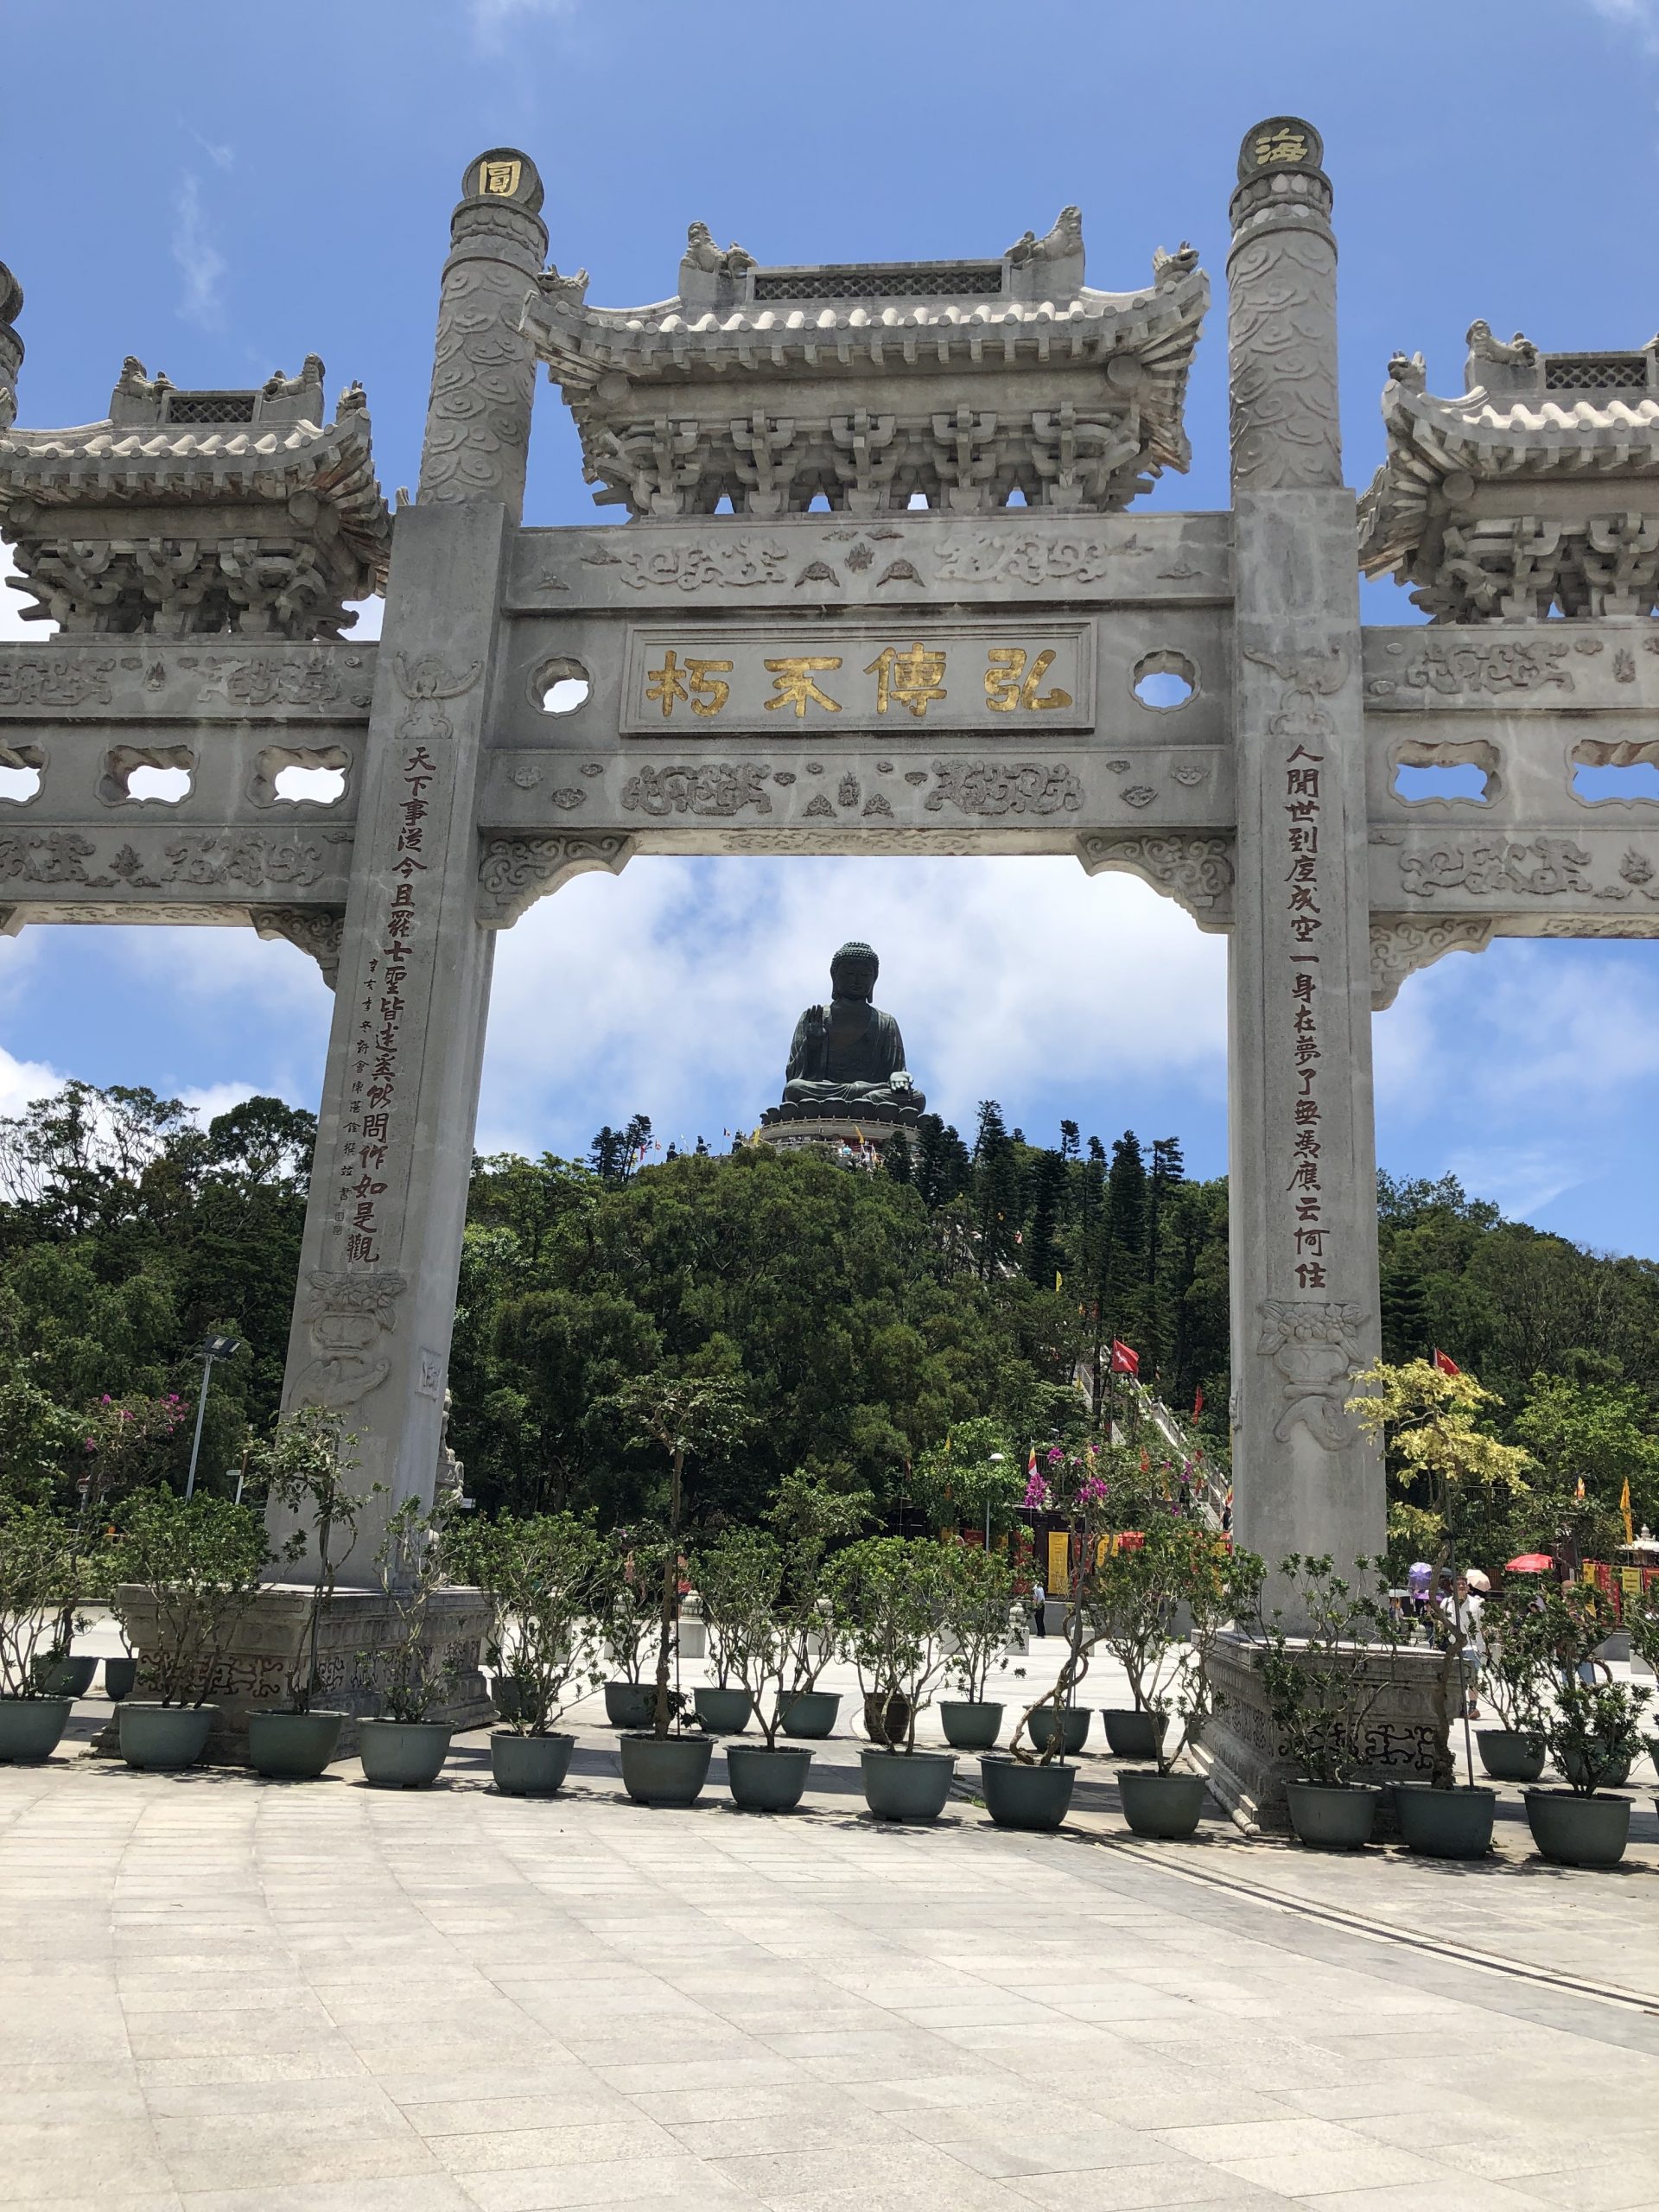 lantau island day tour with 360 cable car ride